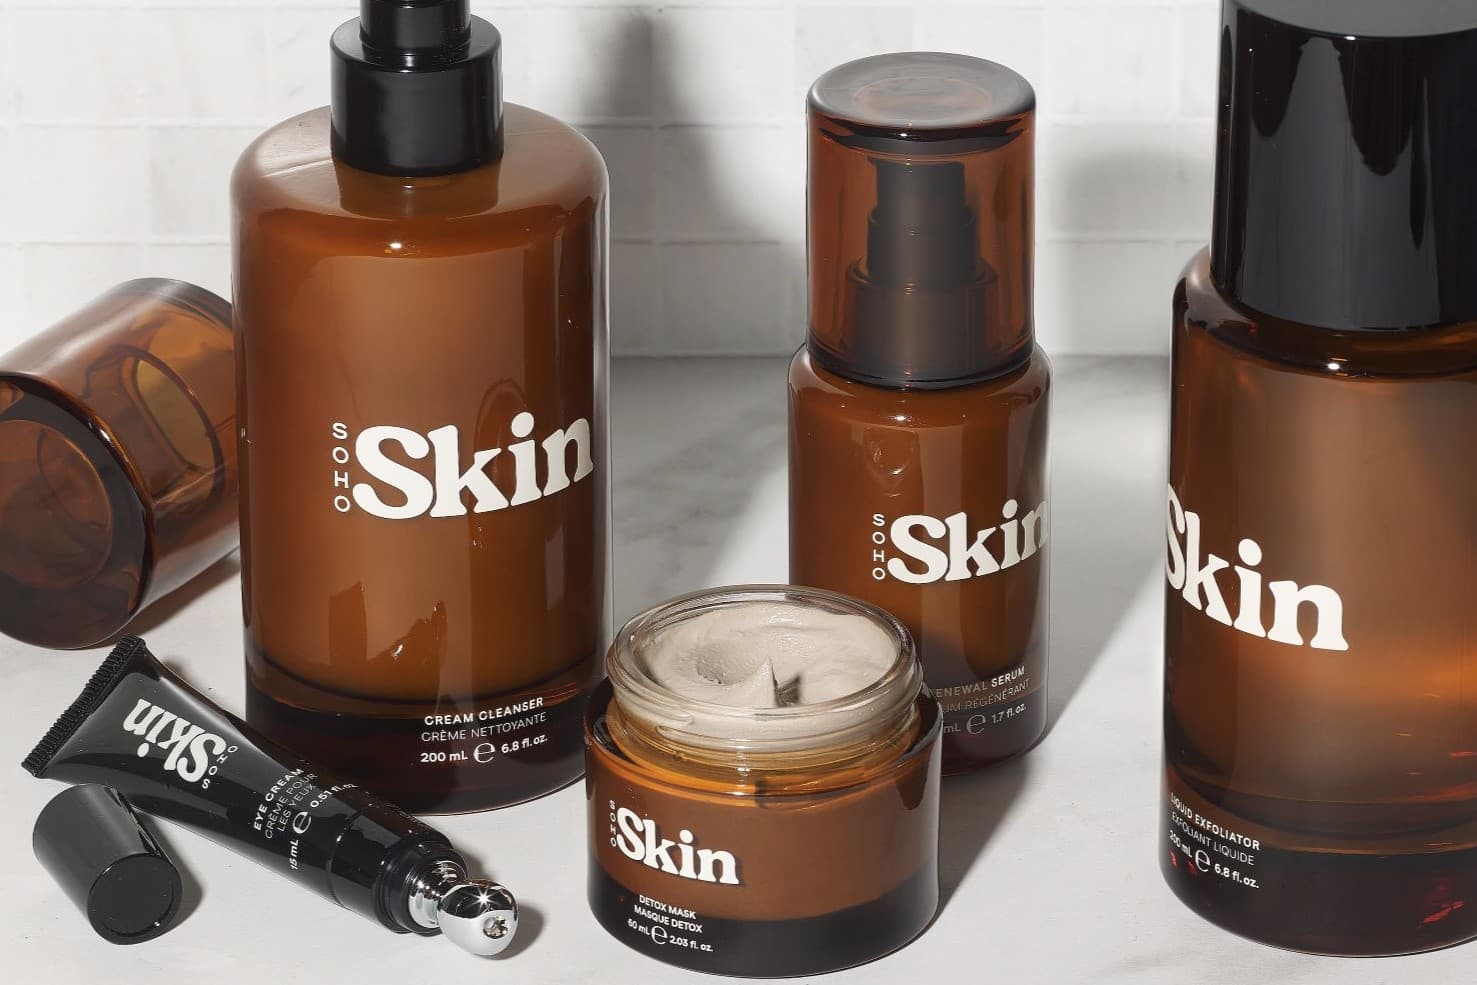 Soho Skin: The 6 Products Your Bathroom Needs